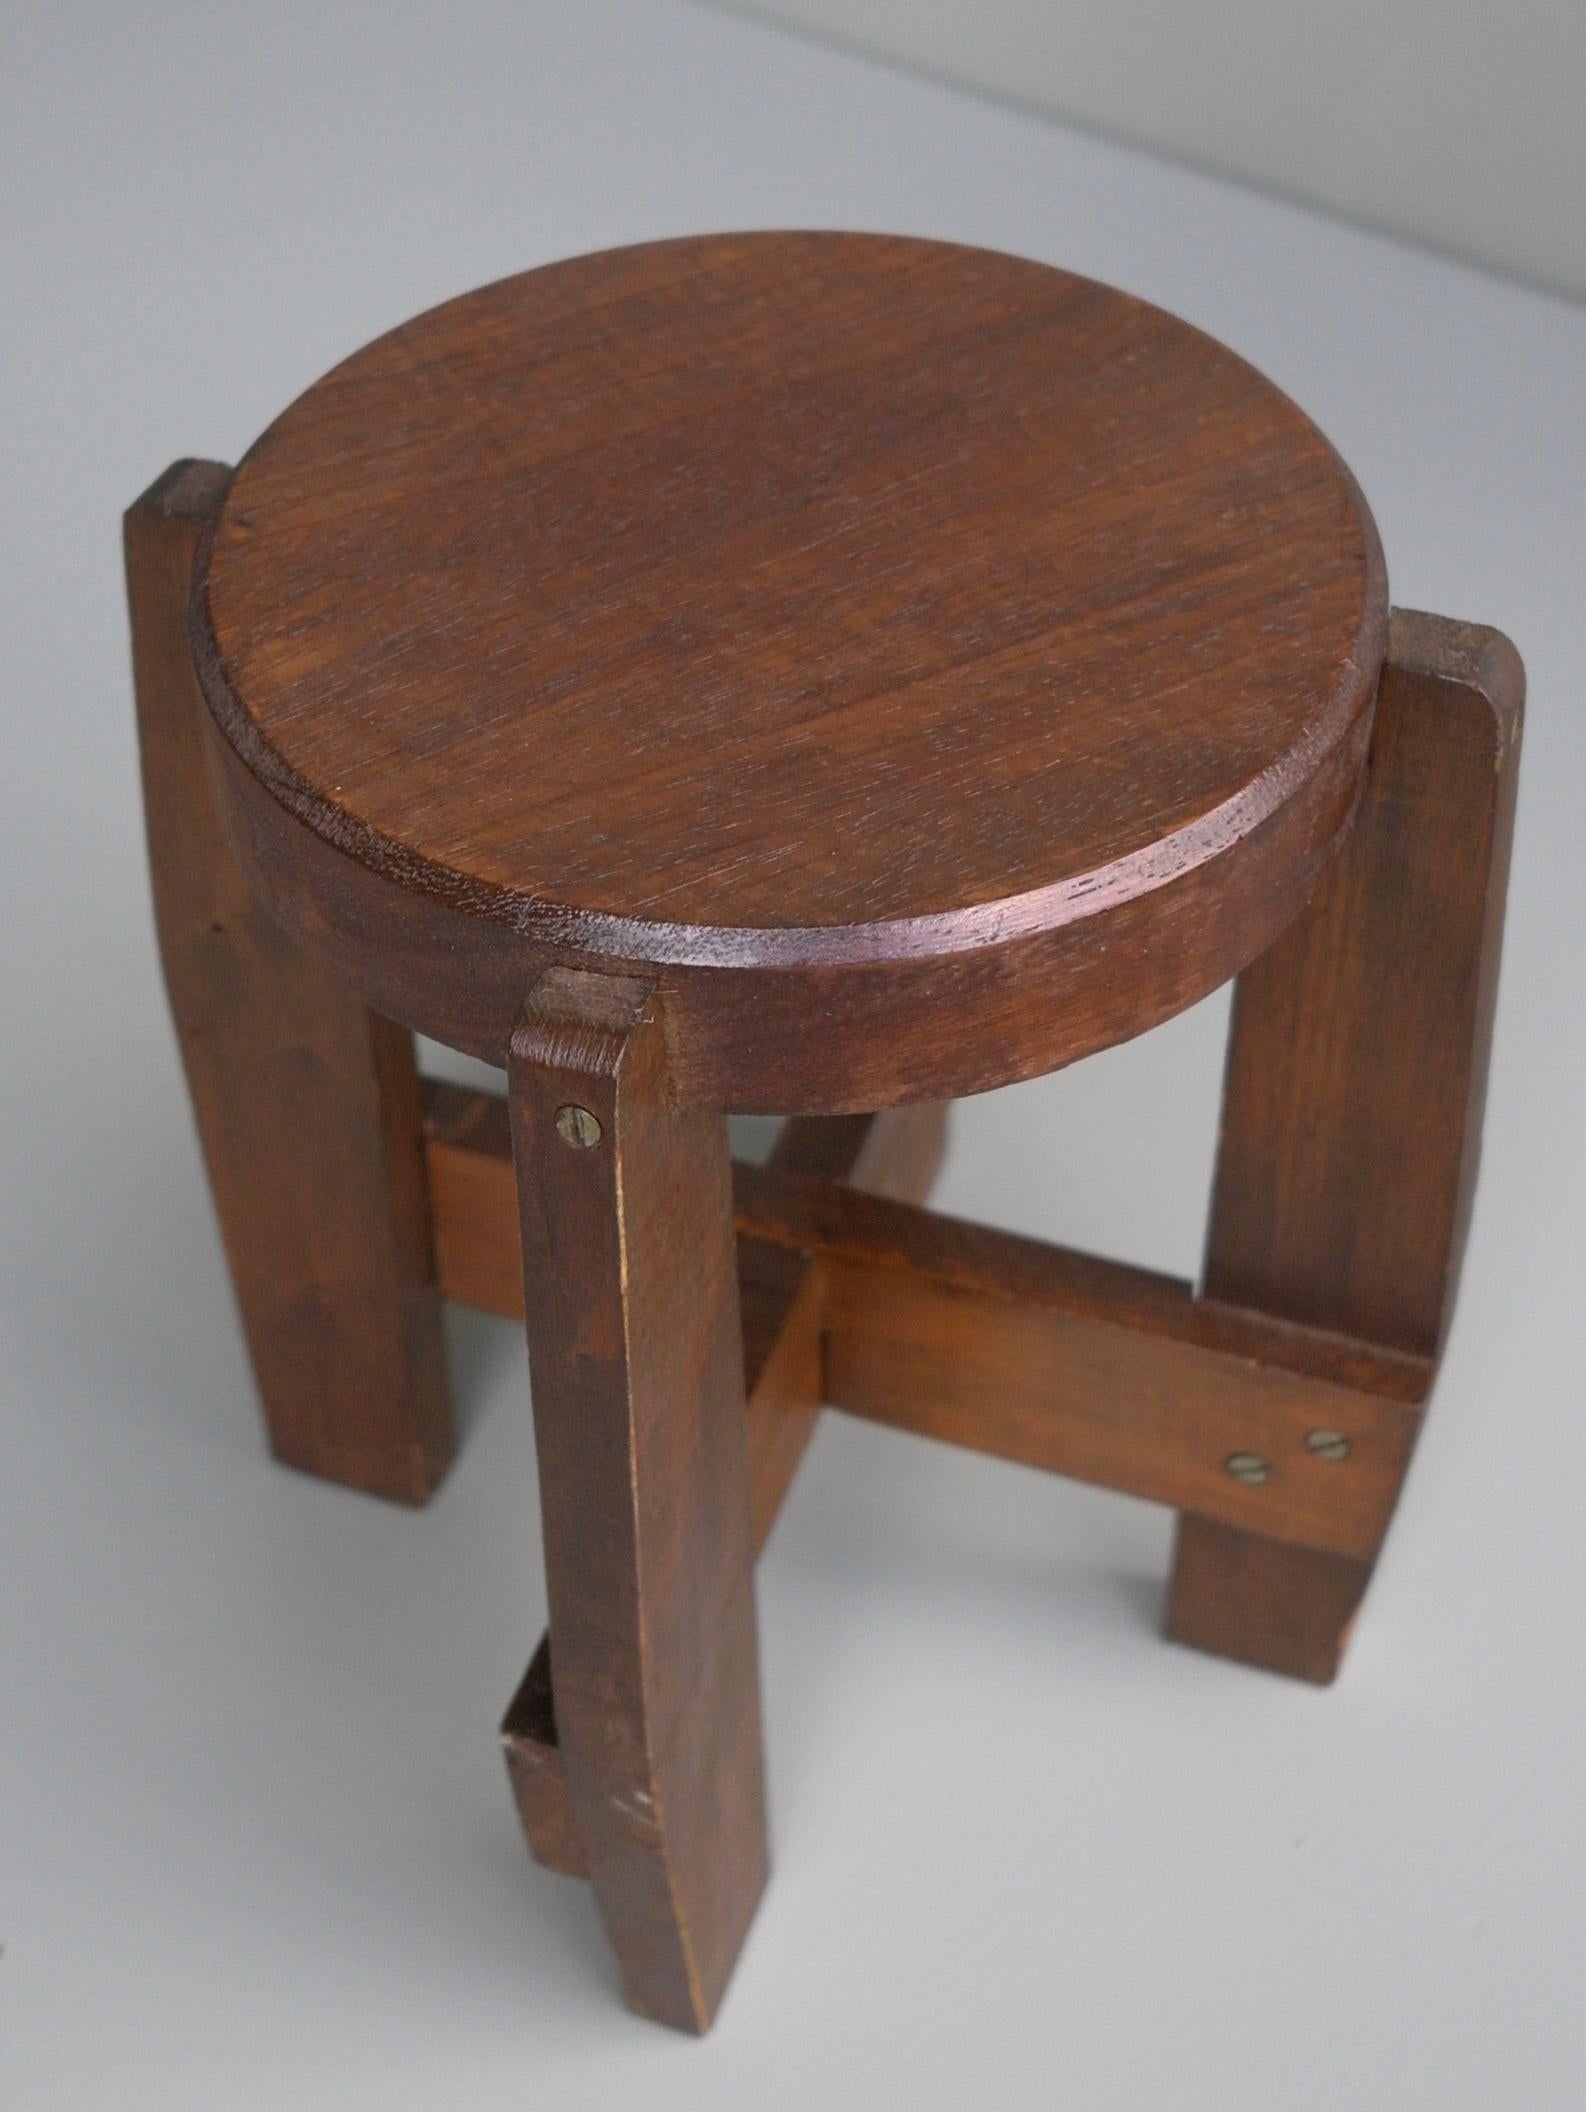 Decorative Art Deco stool or small side table, Mid-Century Modern, Cubism, 1930's.